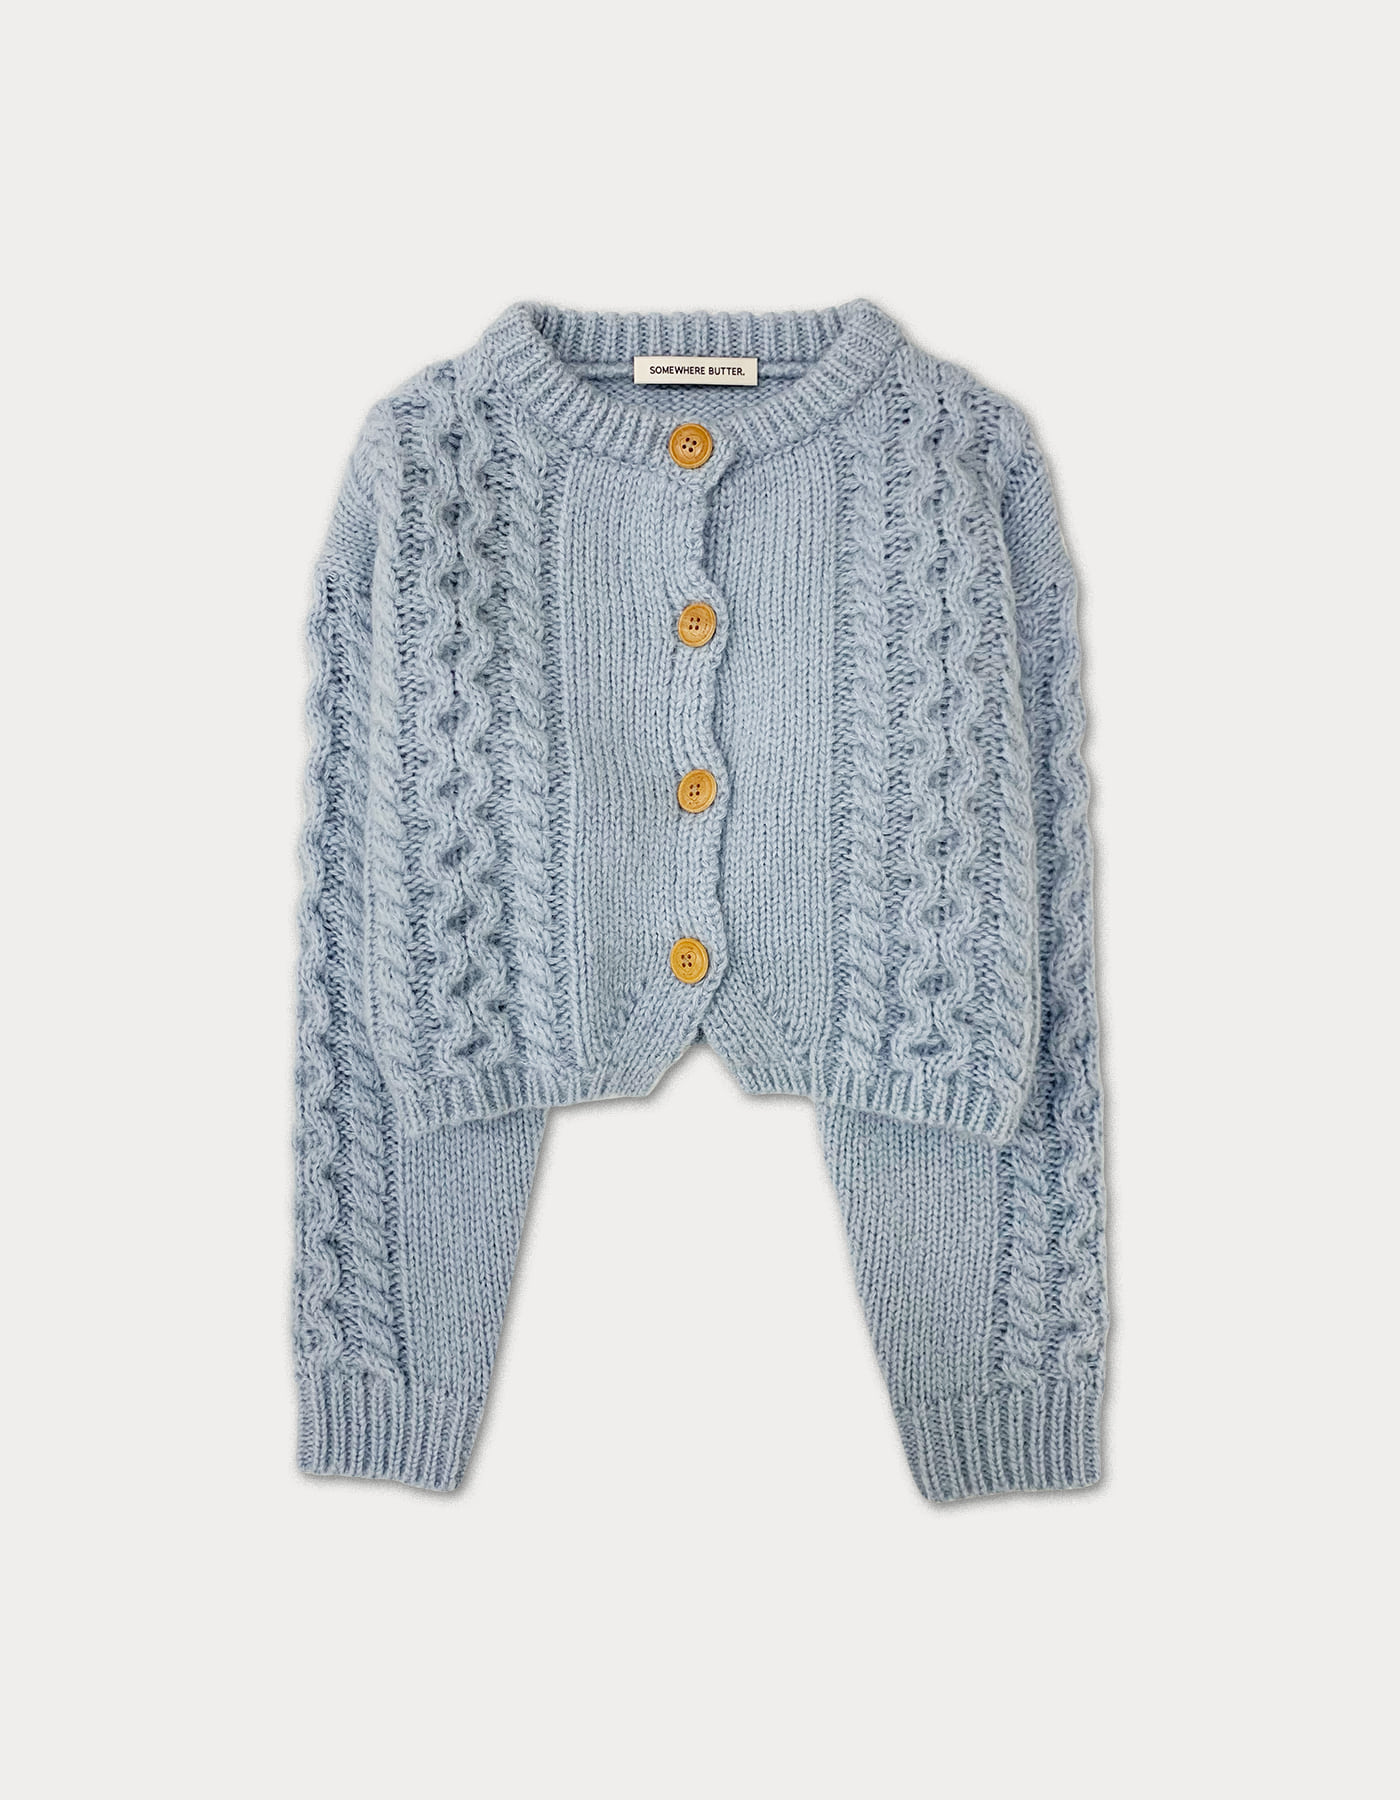 Woodbutton cable cardigan - light blue